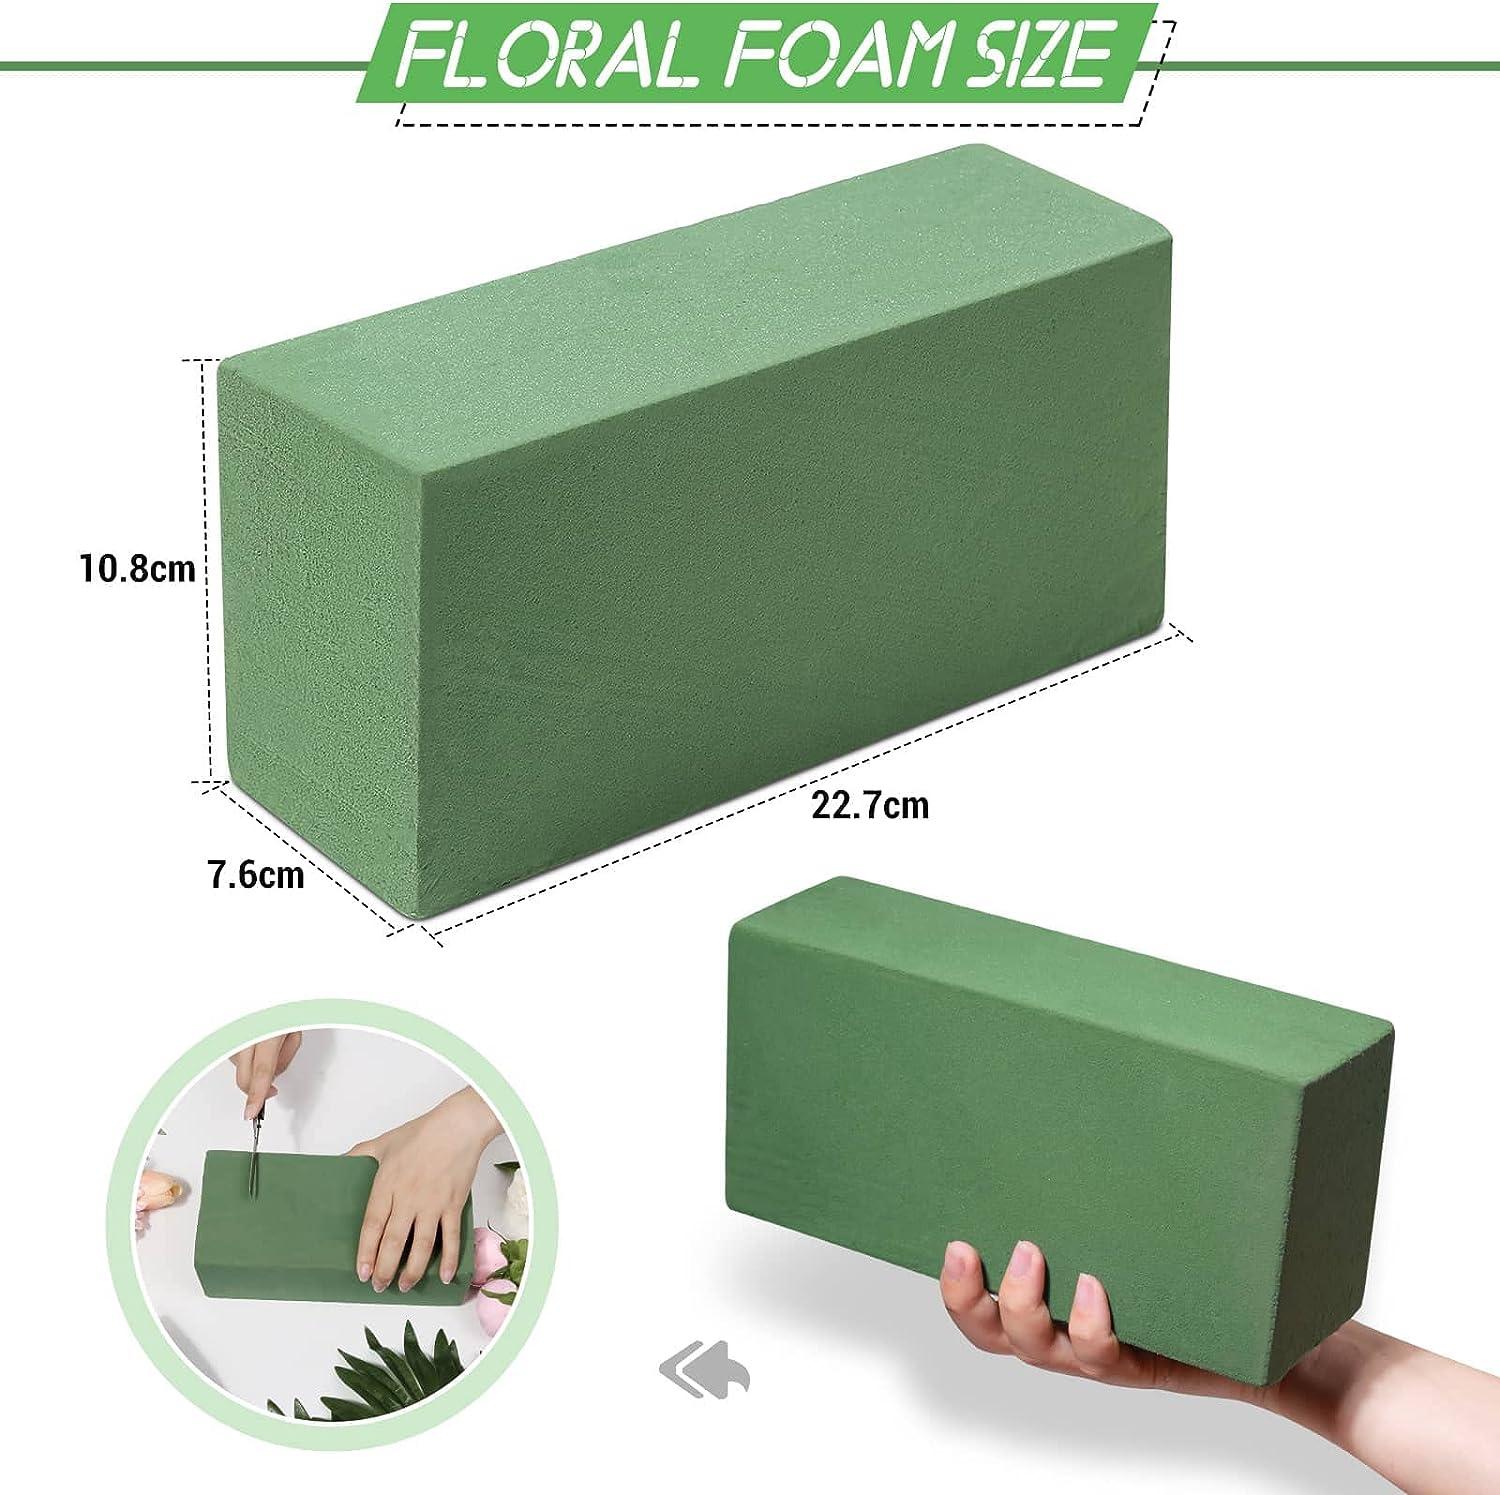 Delivery of floral foam cylinders For The Best Price